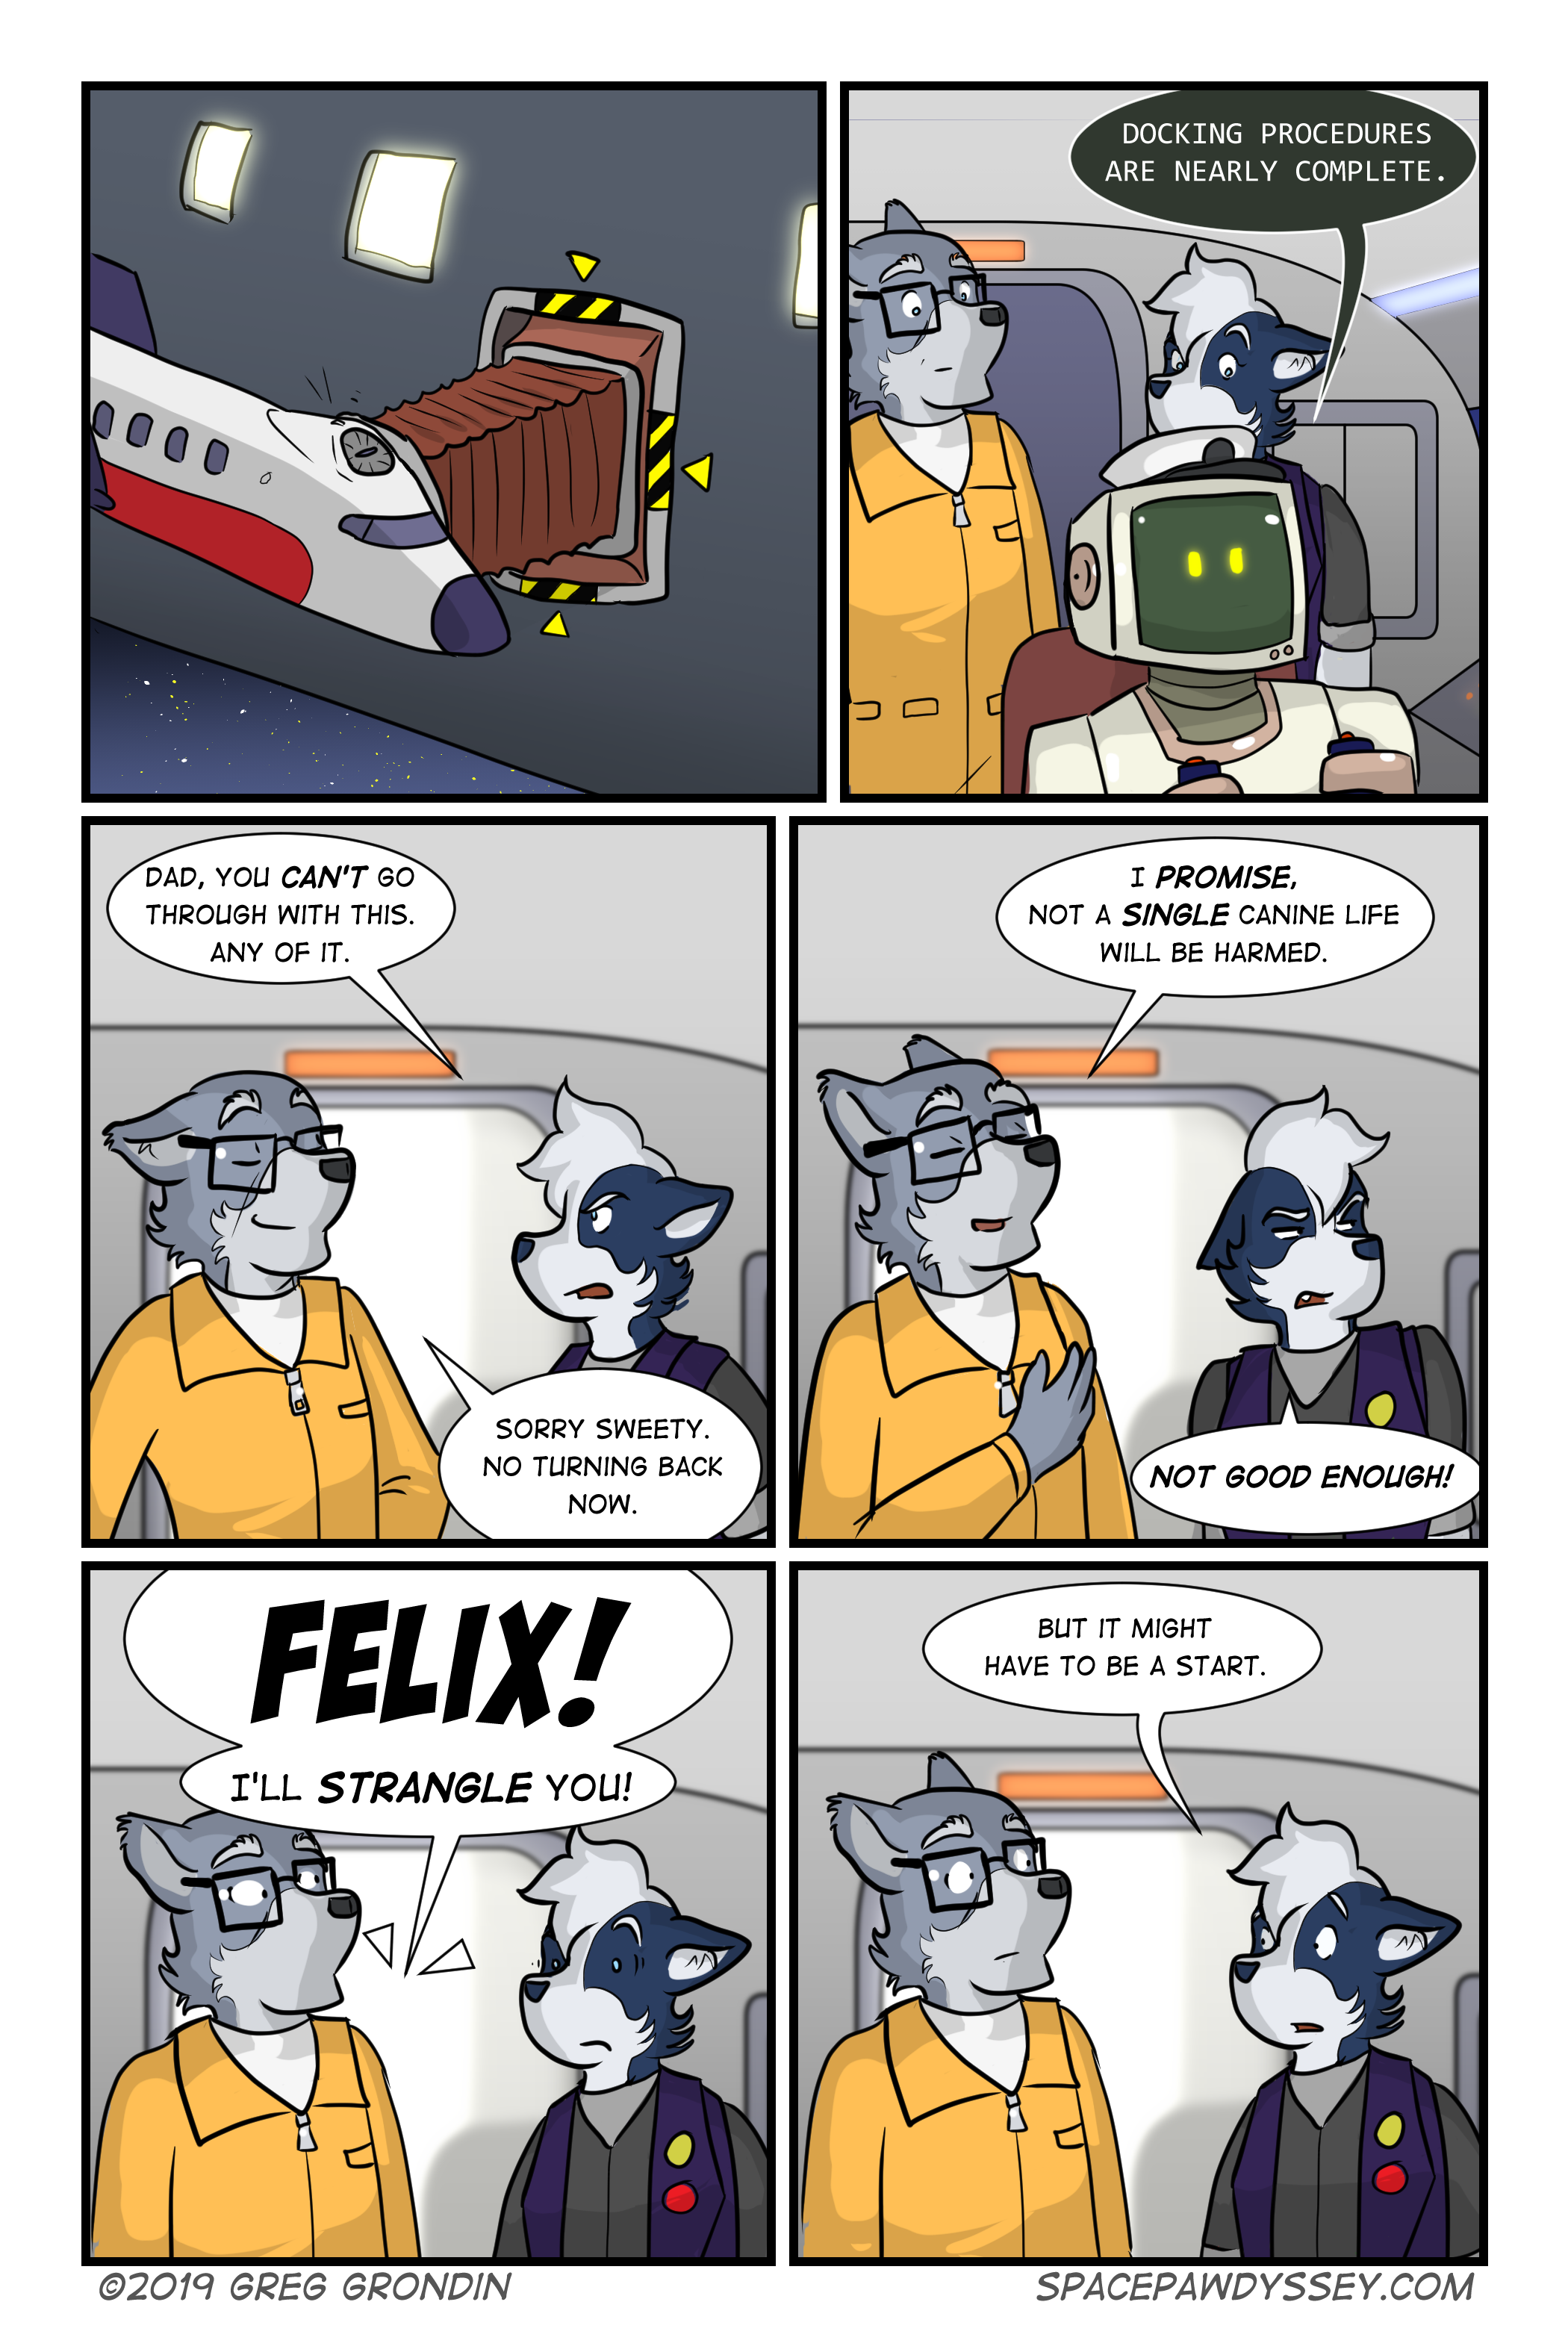 Space Pawdyssey #310